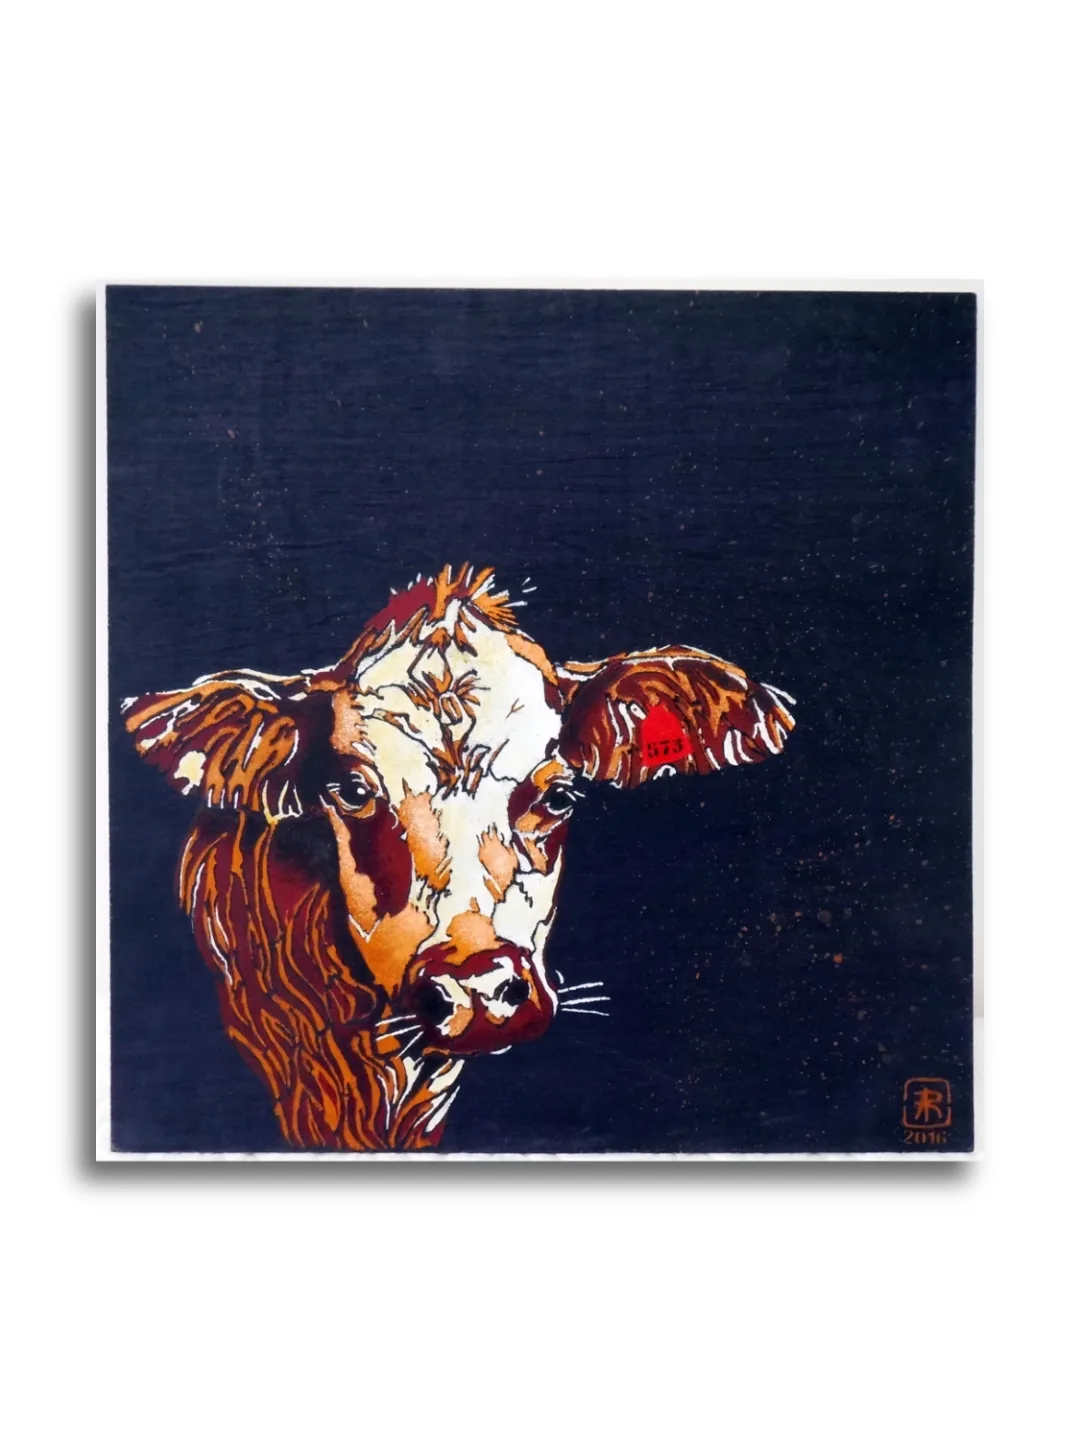 Cow #573 by Ann Richmond - A stunning, Original stencilled artwork featuring a Dairy Cow wearing a numbered ear-tag. Painted in the artist's unique style... Framing available.